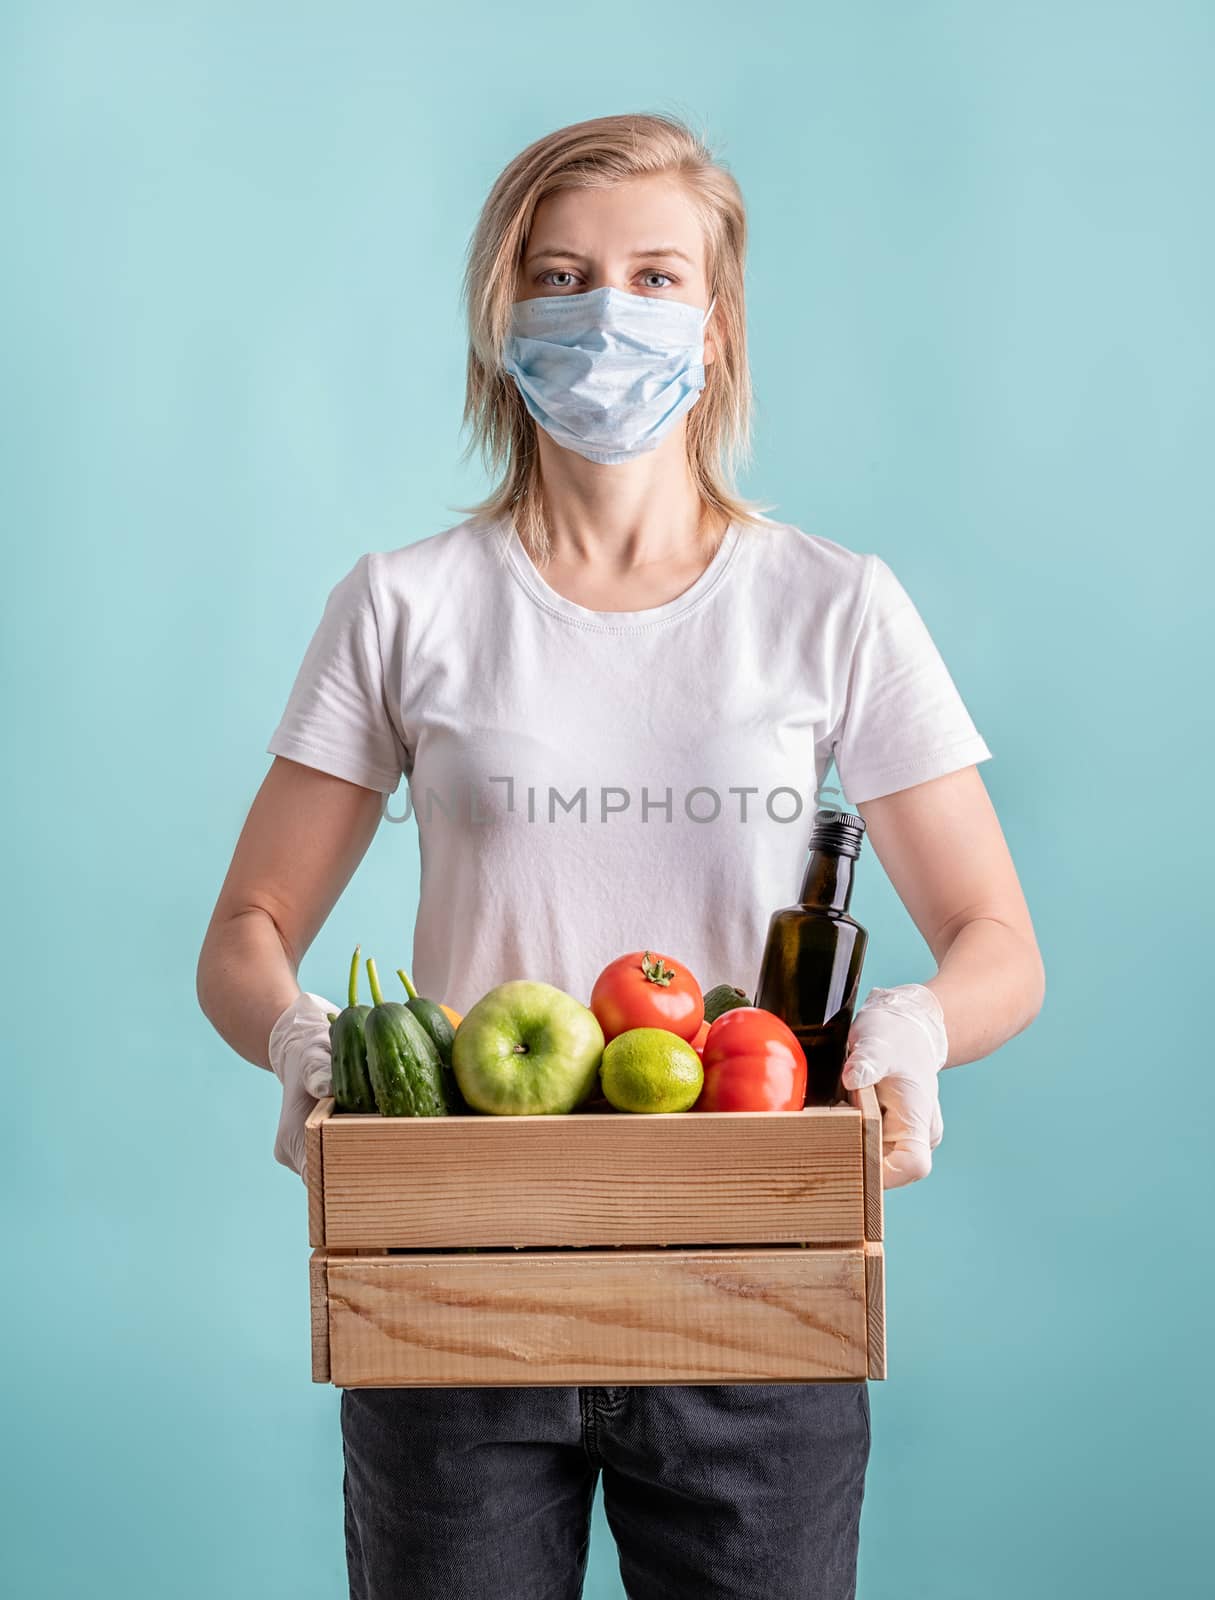 Blond woman in a mask and gloves holding a wooden box full of vegetables by Desperada